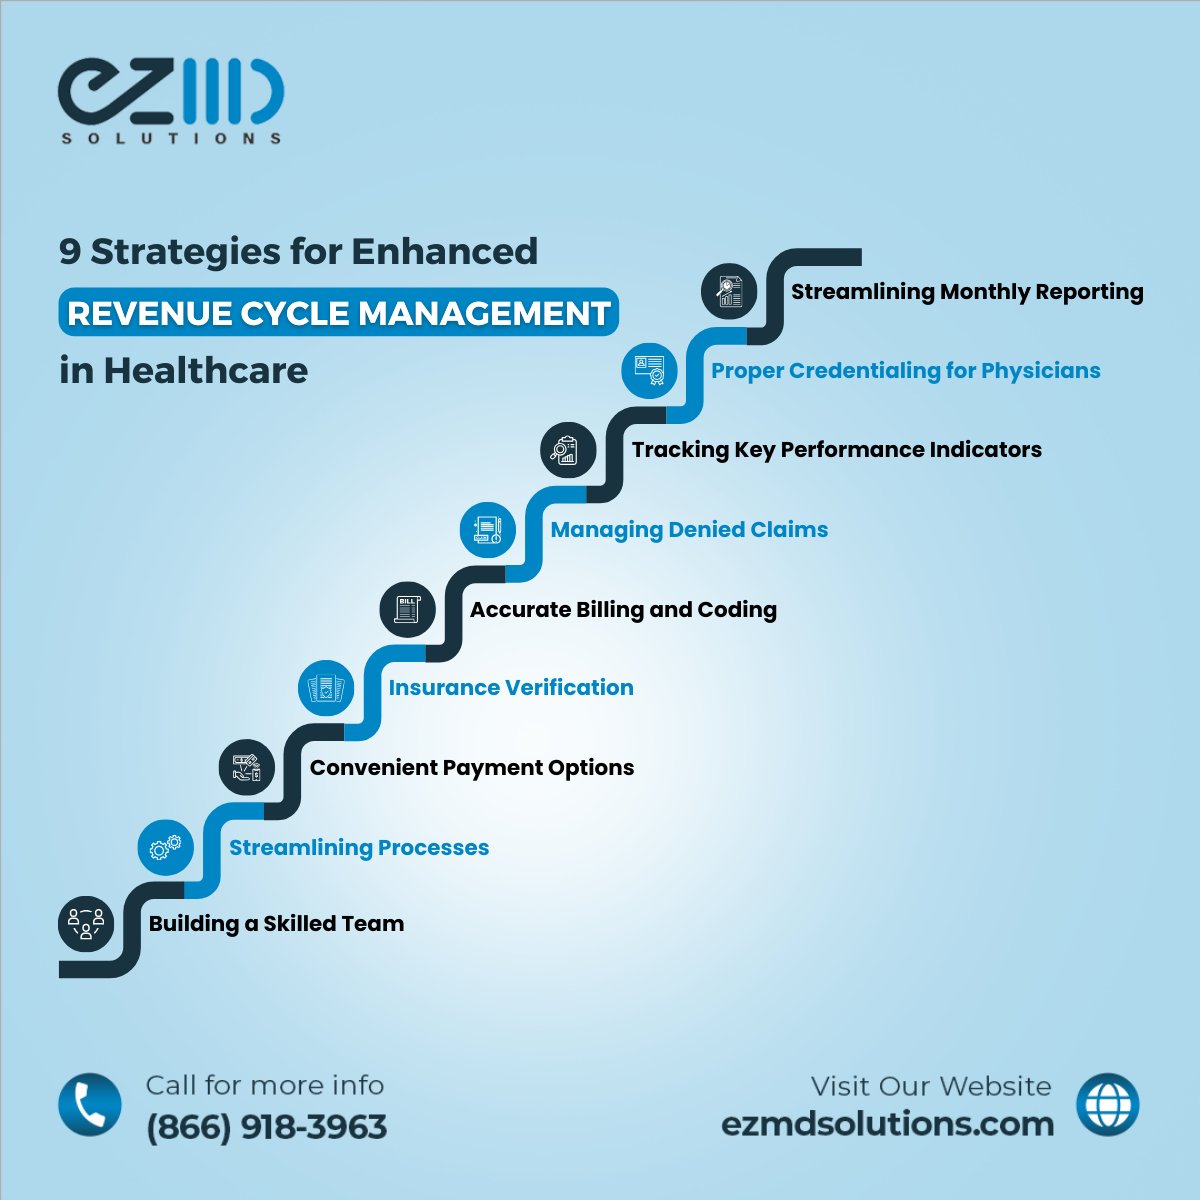 Ensure financial health with optimized #RevenueCycleManagement. Our blog covers RCM essentials, challenges & actionable strategies to streamline processes.

🌐ezmdsolutions.com/how-to-improve…

#EZMDSolutions #MedicalBilling #MedicalCoding #BillingManagement #RevenueCycleSolutions #Texas